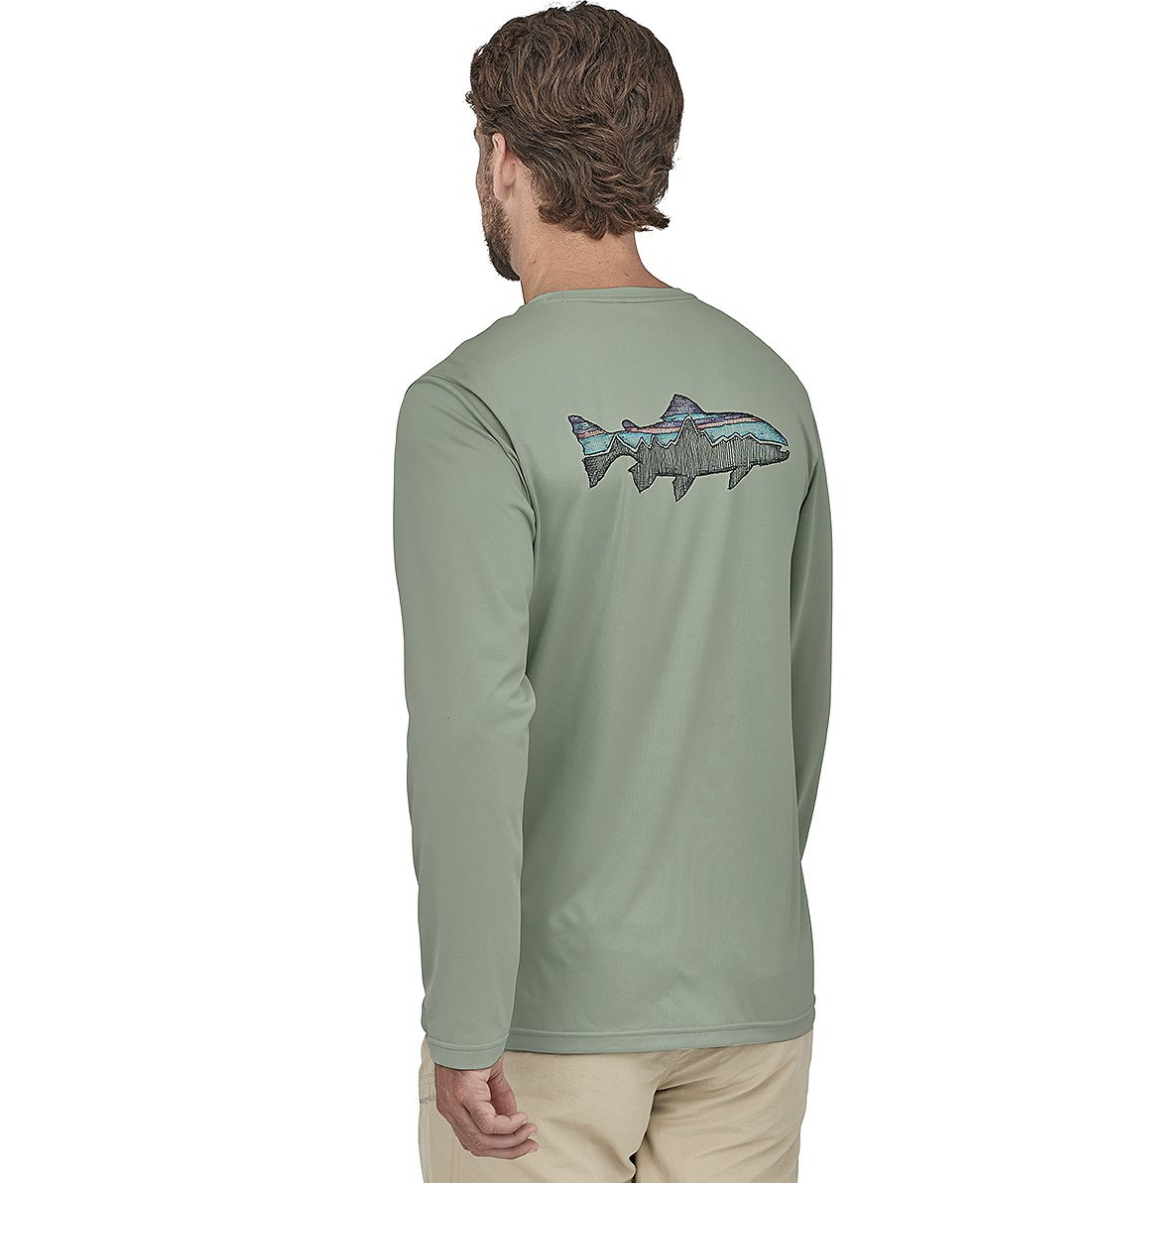 Patagonia M's Graphic Tech Fish Tee - Painted Fitz Roy Permit: Lite Blazing - Large